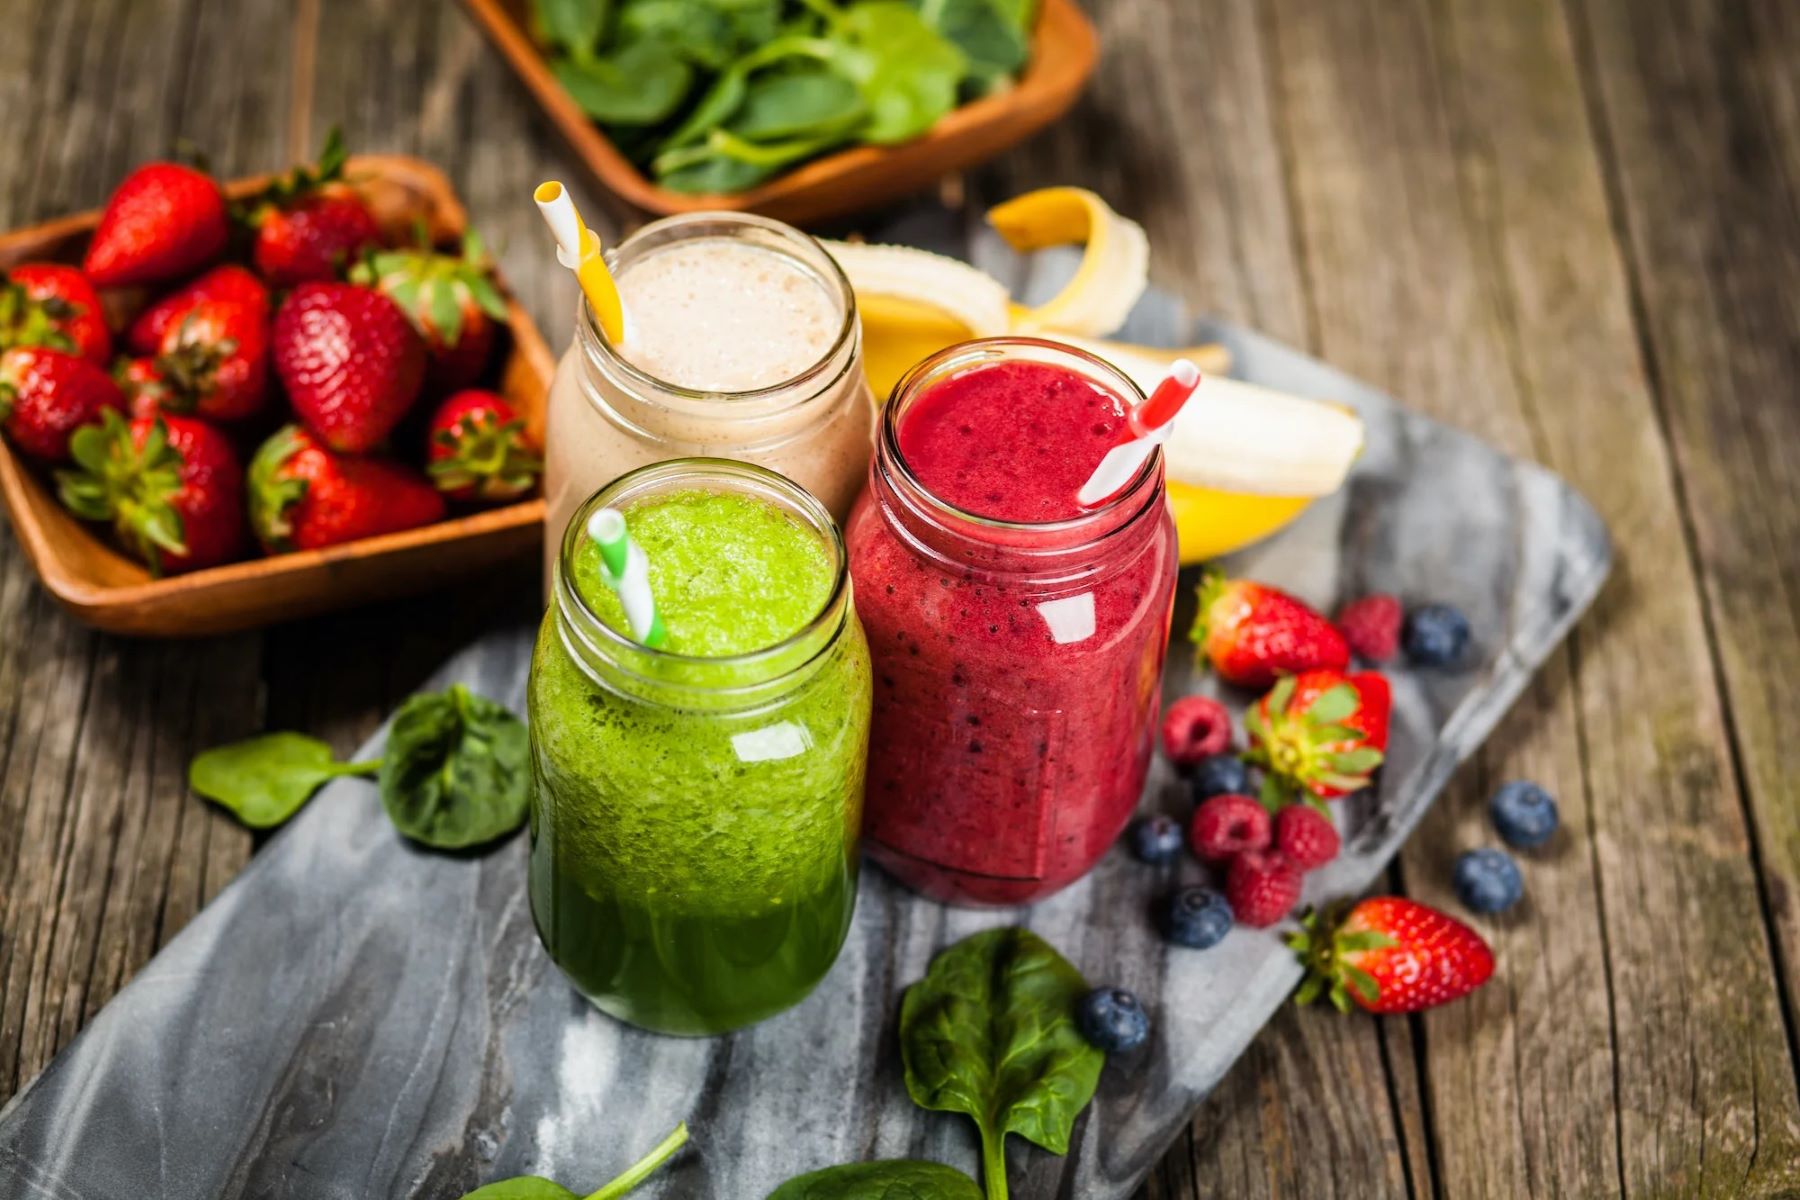 Top 5 Delicious Smoothie Recipes For An Insulin Resistance Diet